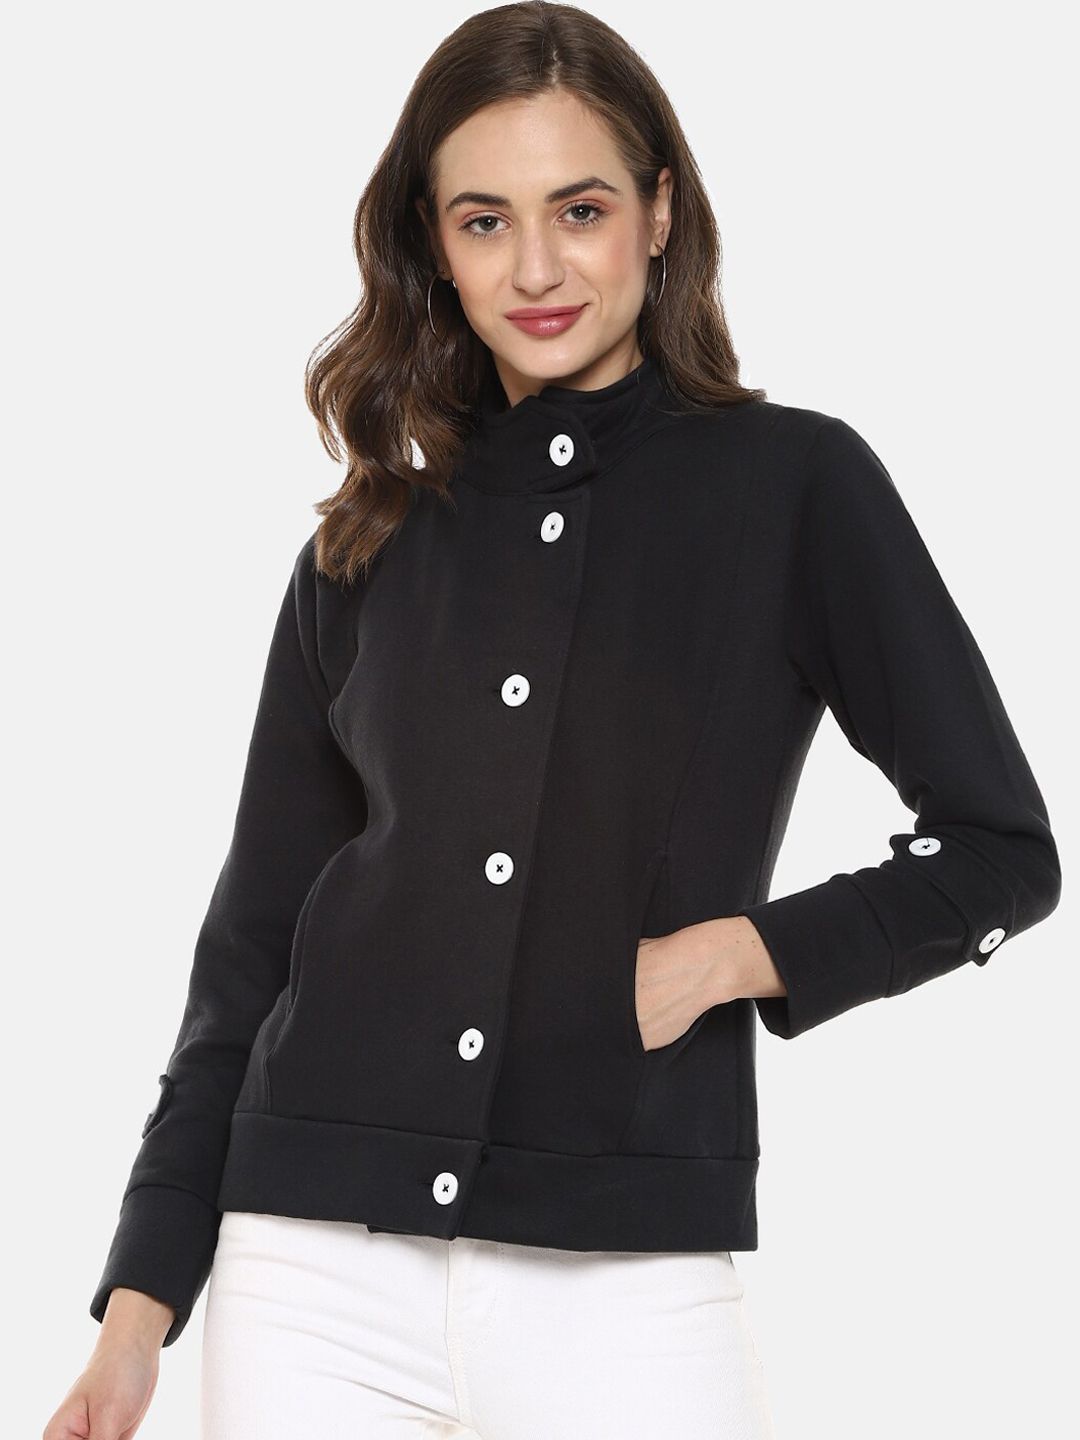 Campus Sutra Women Black Solid Windcheater Tailored Jacket Price in India